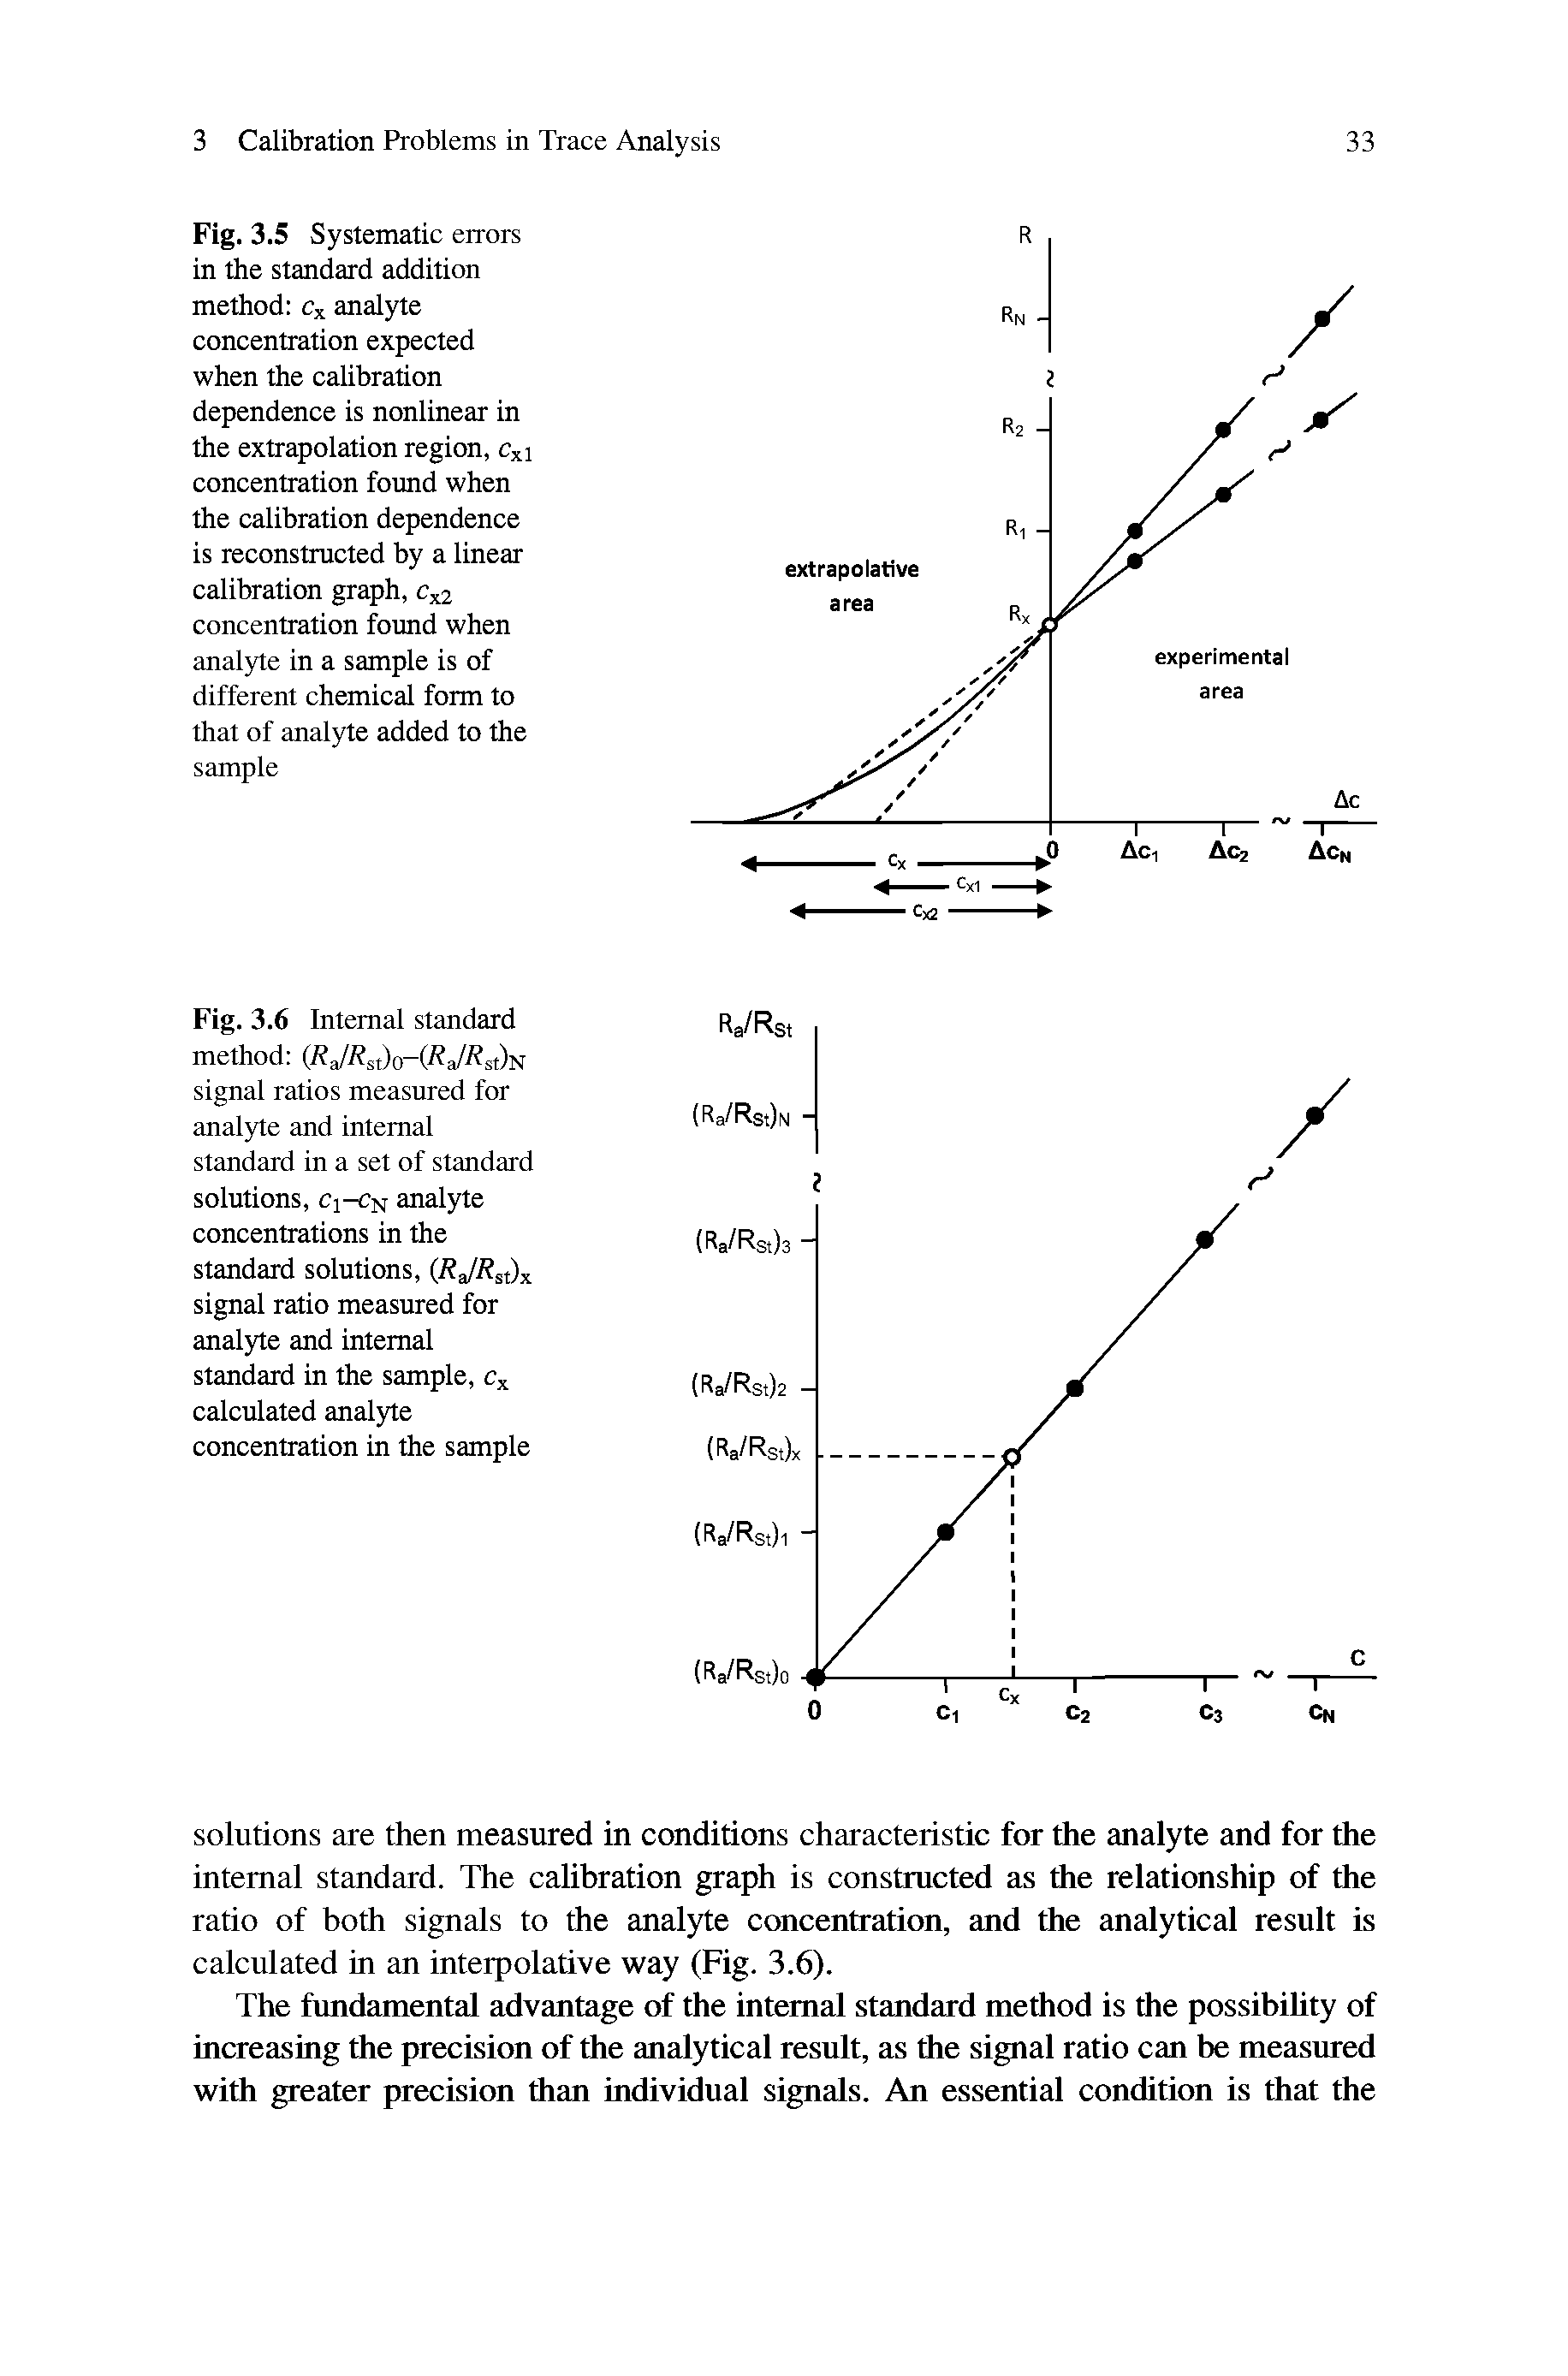 Fig. 3.5 Systematic errors in the standard addition method Cx analyte concentration expected when the calibration dependence is nonlinear in the extrapolation region, c i concentration found when the calibration dependence is reconstructed by a linear calibration graph, c 2 concentration found when analyte in a sample is of different chemical form to that of analyte added to the sample...